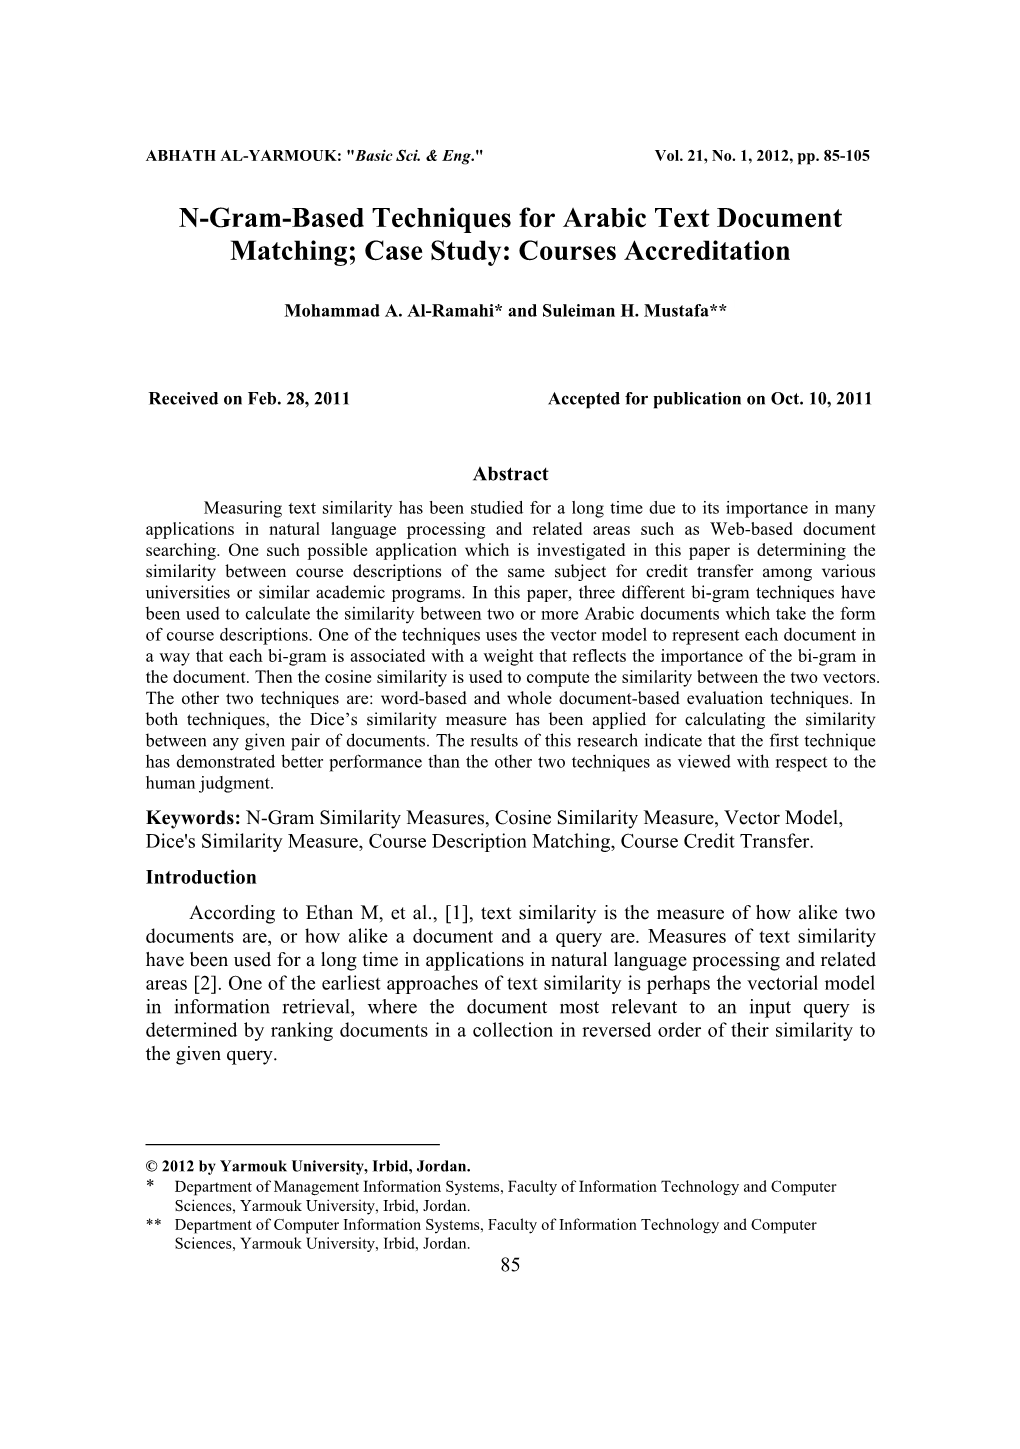 N-Gram-Based Techniques for Arabic Text Document Matching; Case Study: Courses Accreditation